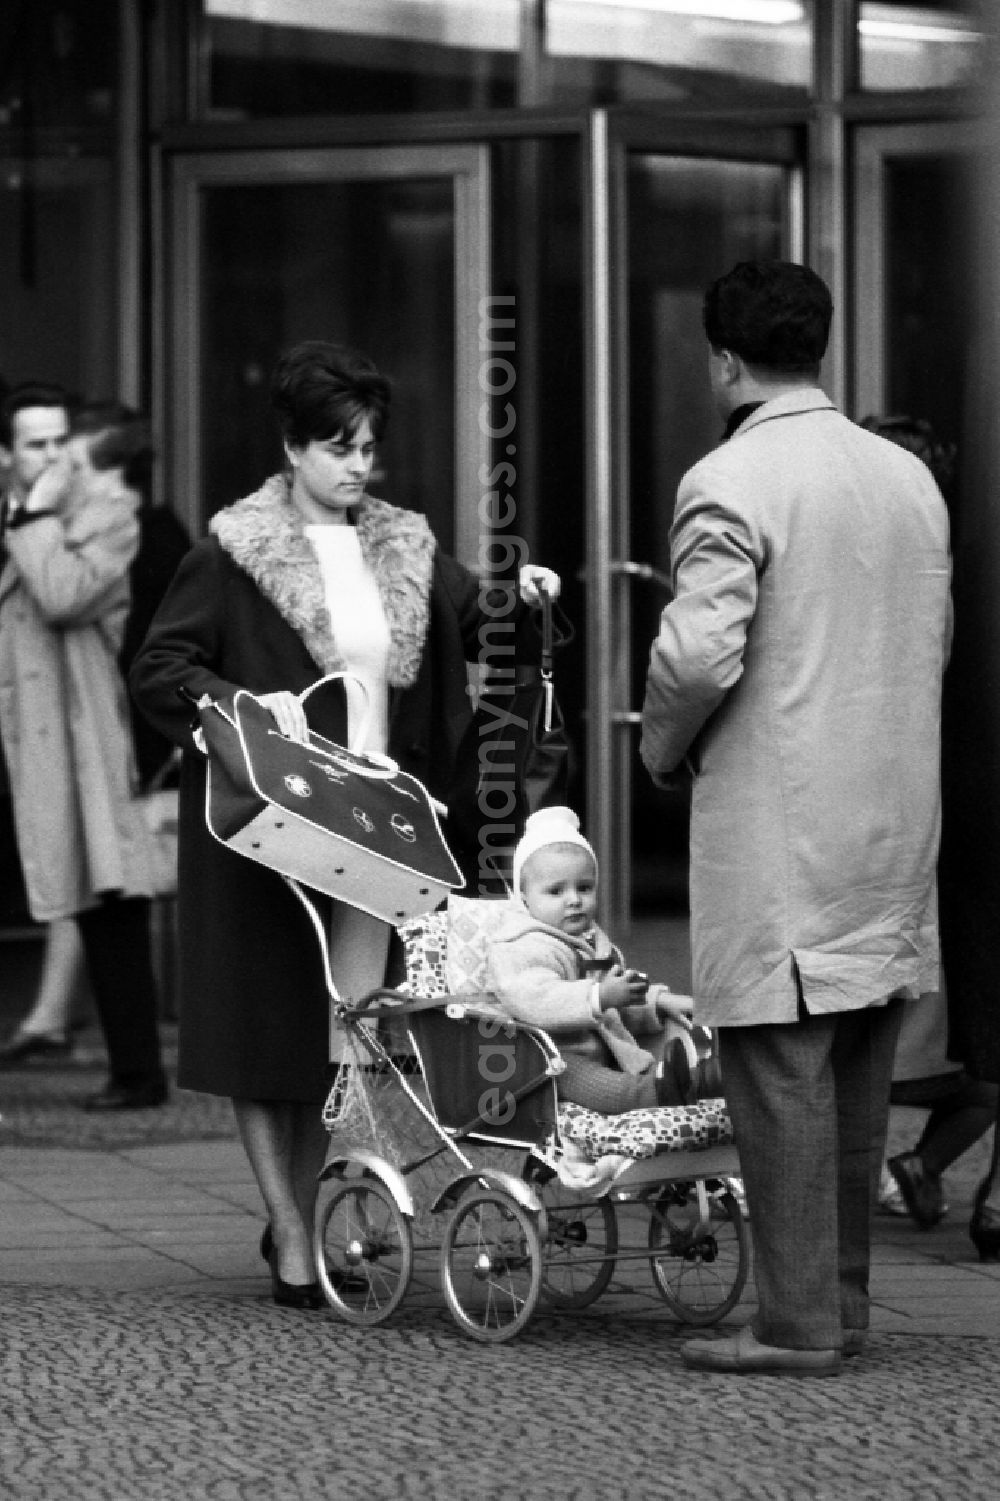 GDR photo archive: Berlin - Mother and father stroll with their child in a stroller in East Berlin in the territory of the former GDR, German Democratic Republic